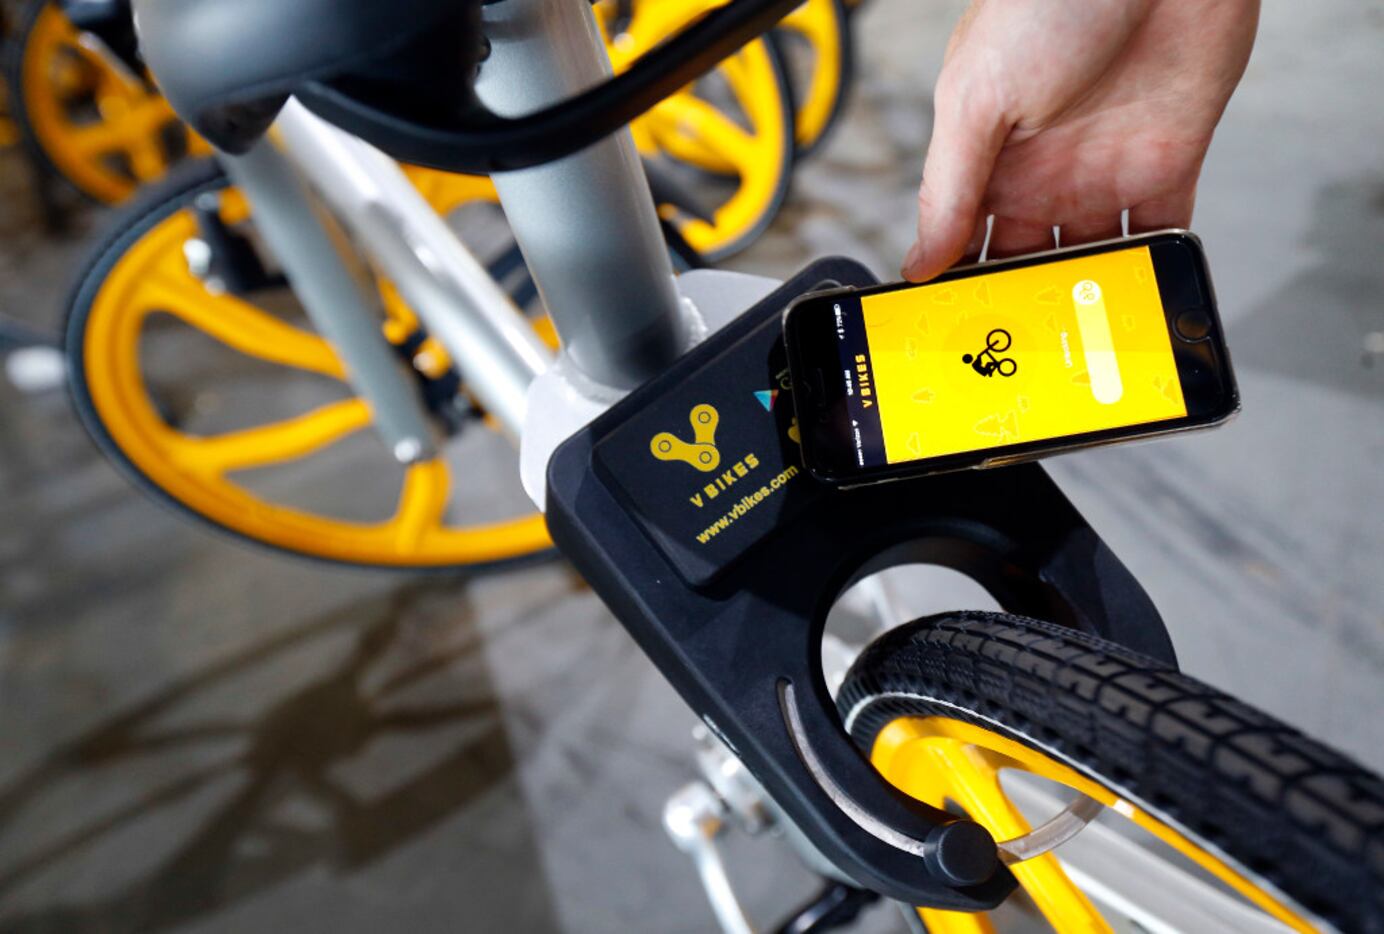 The app on a smartphone is used to unlock a VBike smart lock box on the rear tire of a...